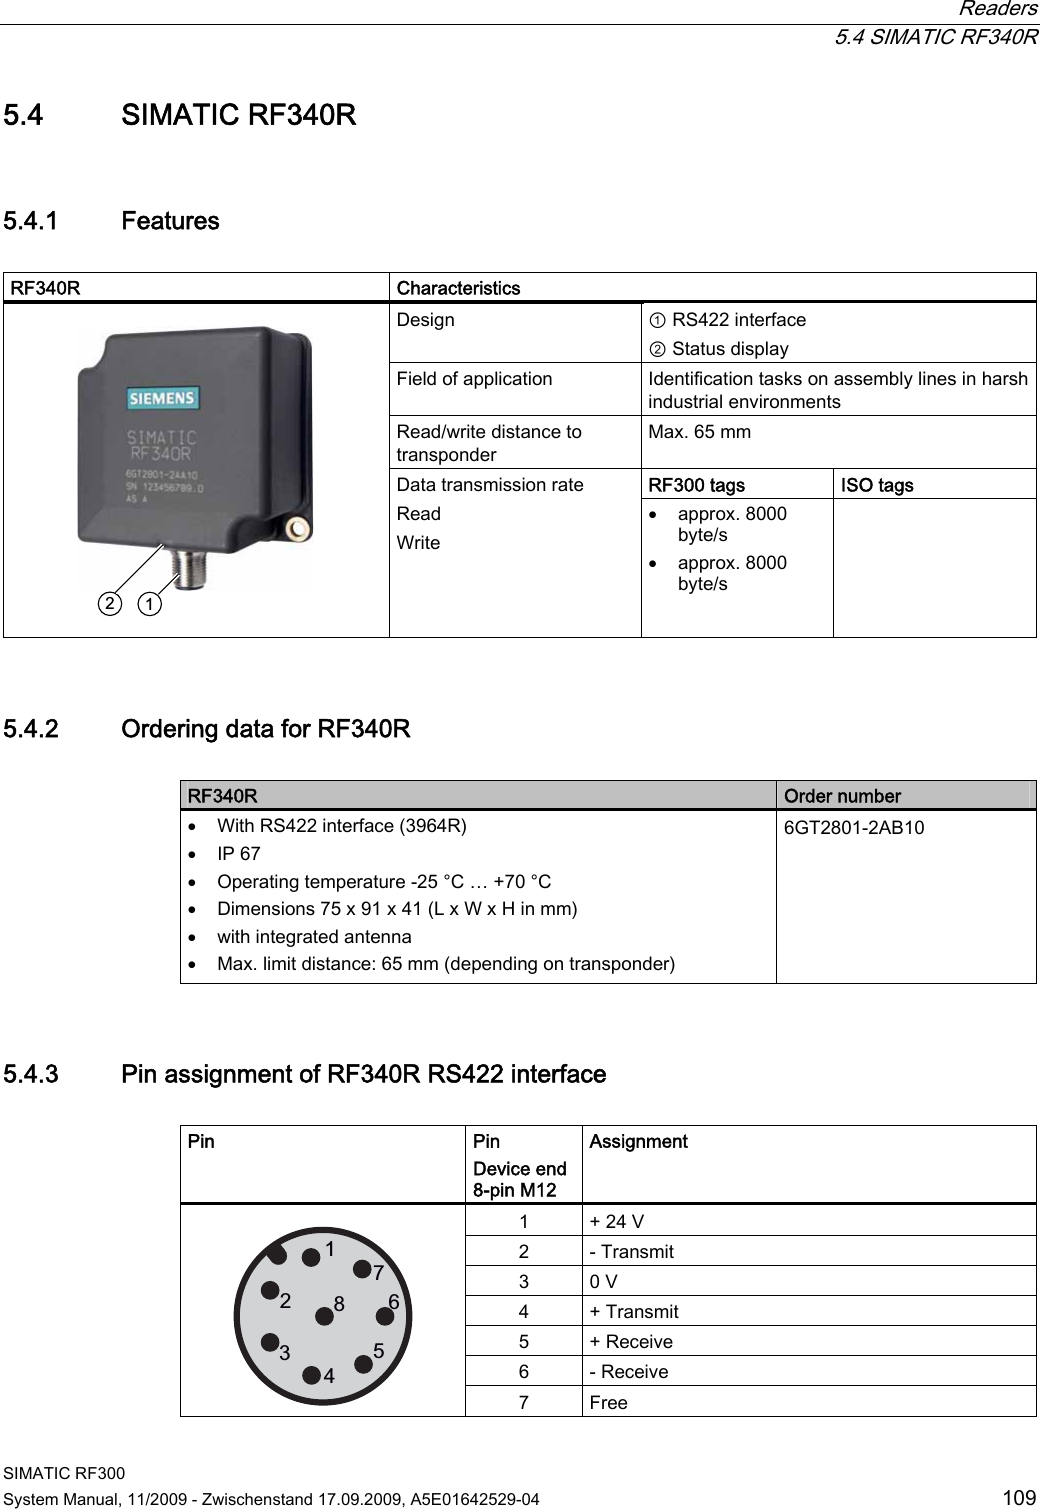  Readers  5.4 SIMATIC RF340R SIMATIC RF300 System Manual, 11/2009 - Zwischenstand 17.09.2009, A5E01642529-04  109 5.4 SIMATIC RF340R 5.4.1 Features  RF340R   Characteristics Design  ① RS422 interface ② Status display Field of application  Identification tasks on assembly lines in harsh industrial environments Read/write distance to transponder Max. 65 mm RF300 tags ISO tags     Data transmission rate Read Write  approx. 8000 byte/s  approx. 8000 byte/s  5.4.2 Ordering data for RF340R  RF340R  Order number  With RS422 interface (3964R)  IP 67  Operating temperature -25 °C … +70 °C  Dimensions 75 x 91 x 41 (L x W x H in mm)  with integrated antenna  Max. limit distance: 65 mm (depending on transponder) 6GT2801-2AB10 5.4.3 Pin assignment of RF340R RS422 interface  Pin  Pin Device end 8-pin M12 Assignment 1  + 24 V 2  - Transmit 3  0 V 4  + Transmit 5  + Receive 6  - Receive   7  Free 